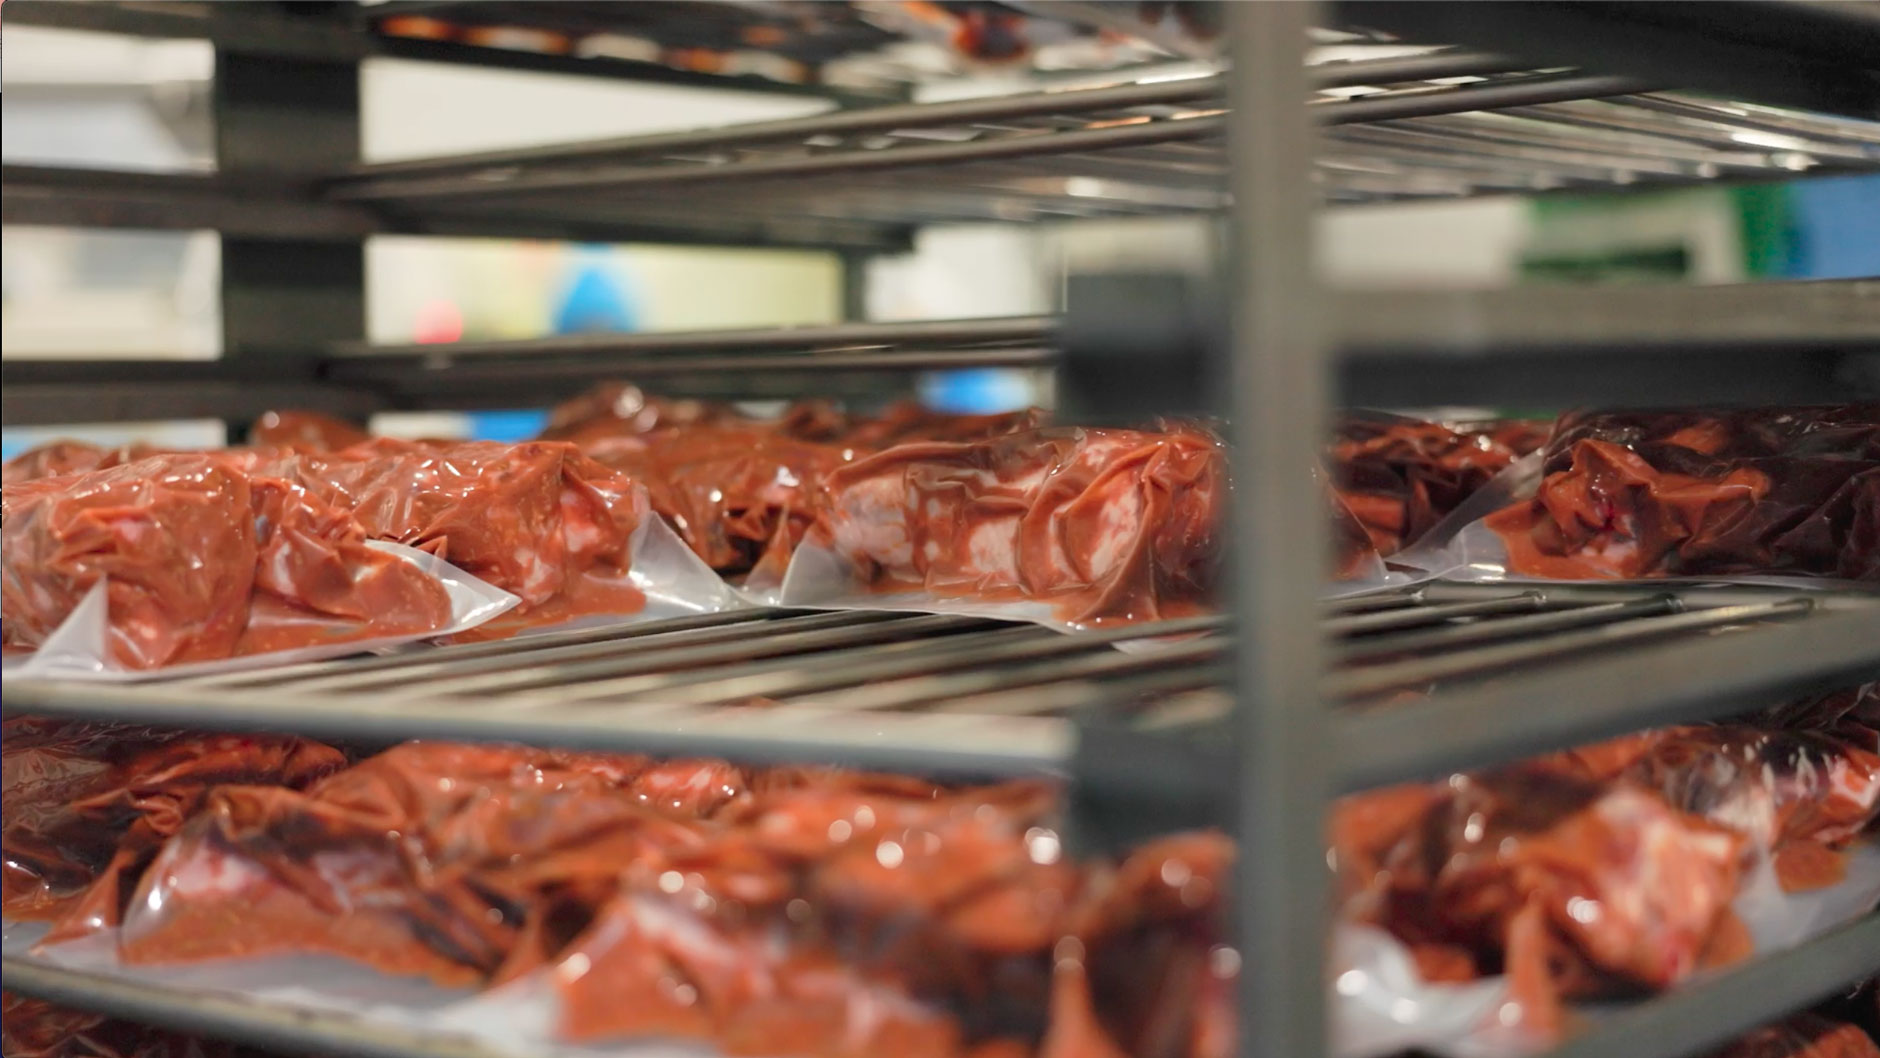 Teys marinated beef packaged in a manufacturing plant.